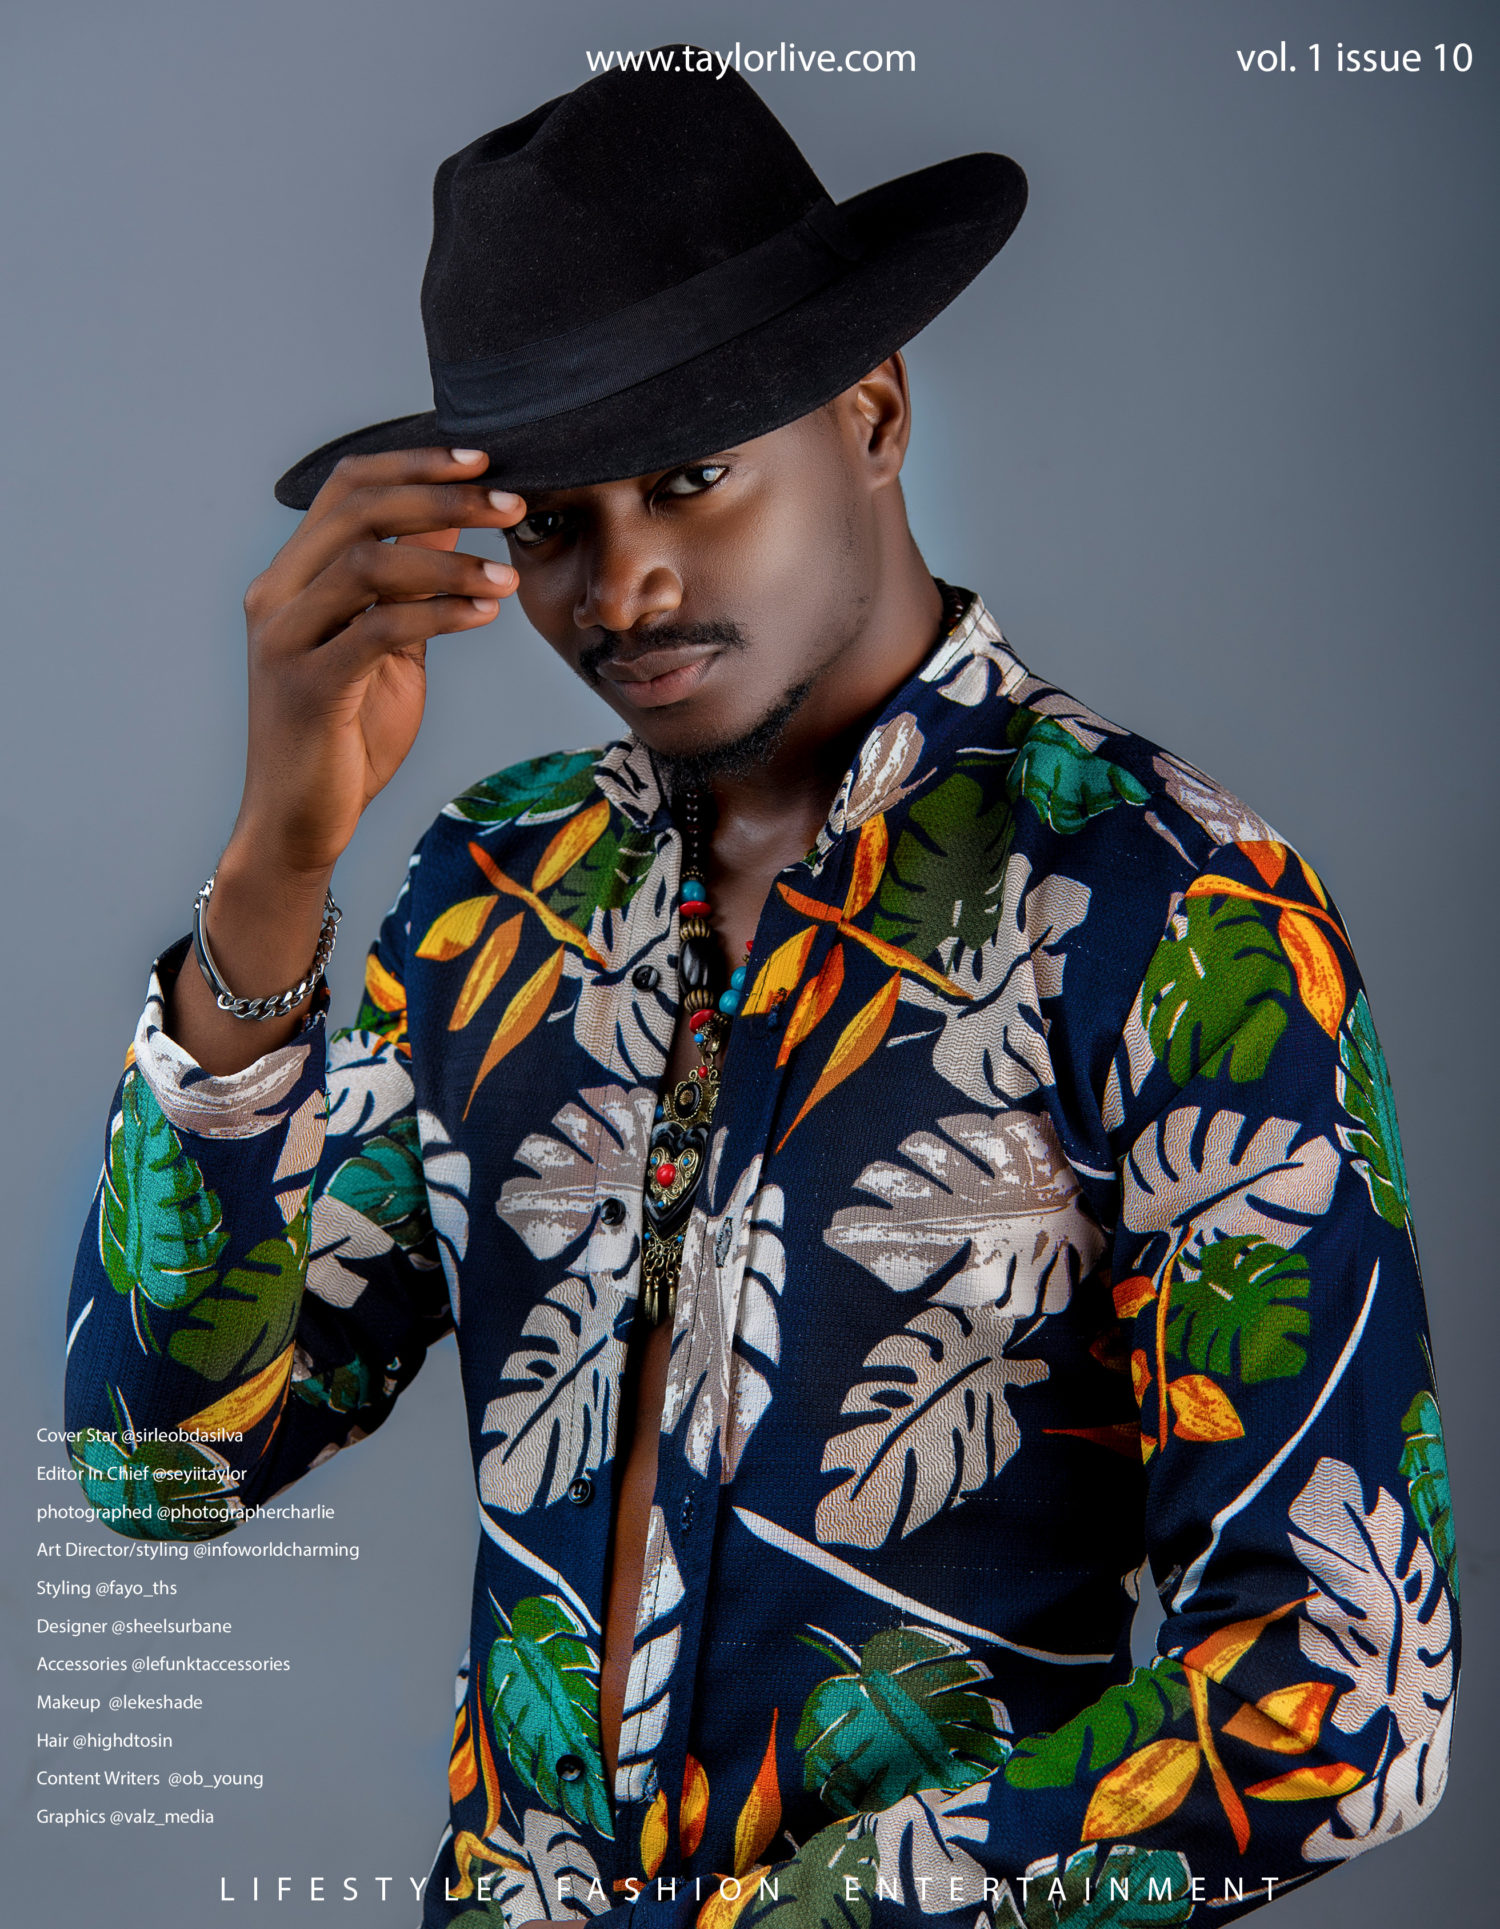 Leo Dasilvia Is The Cover Star For Taylor Live Magazine New Issue